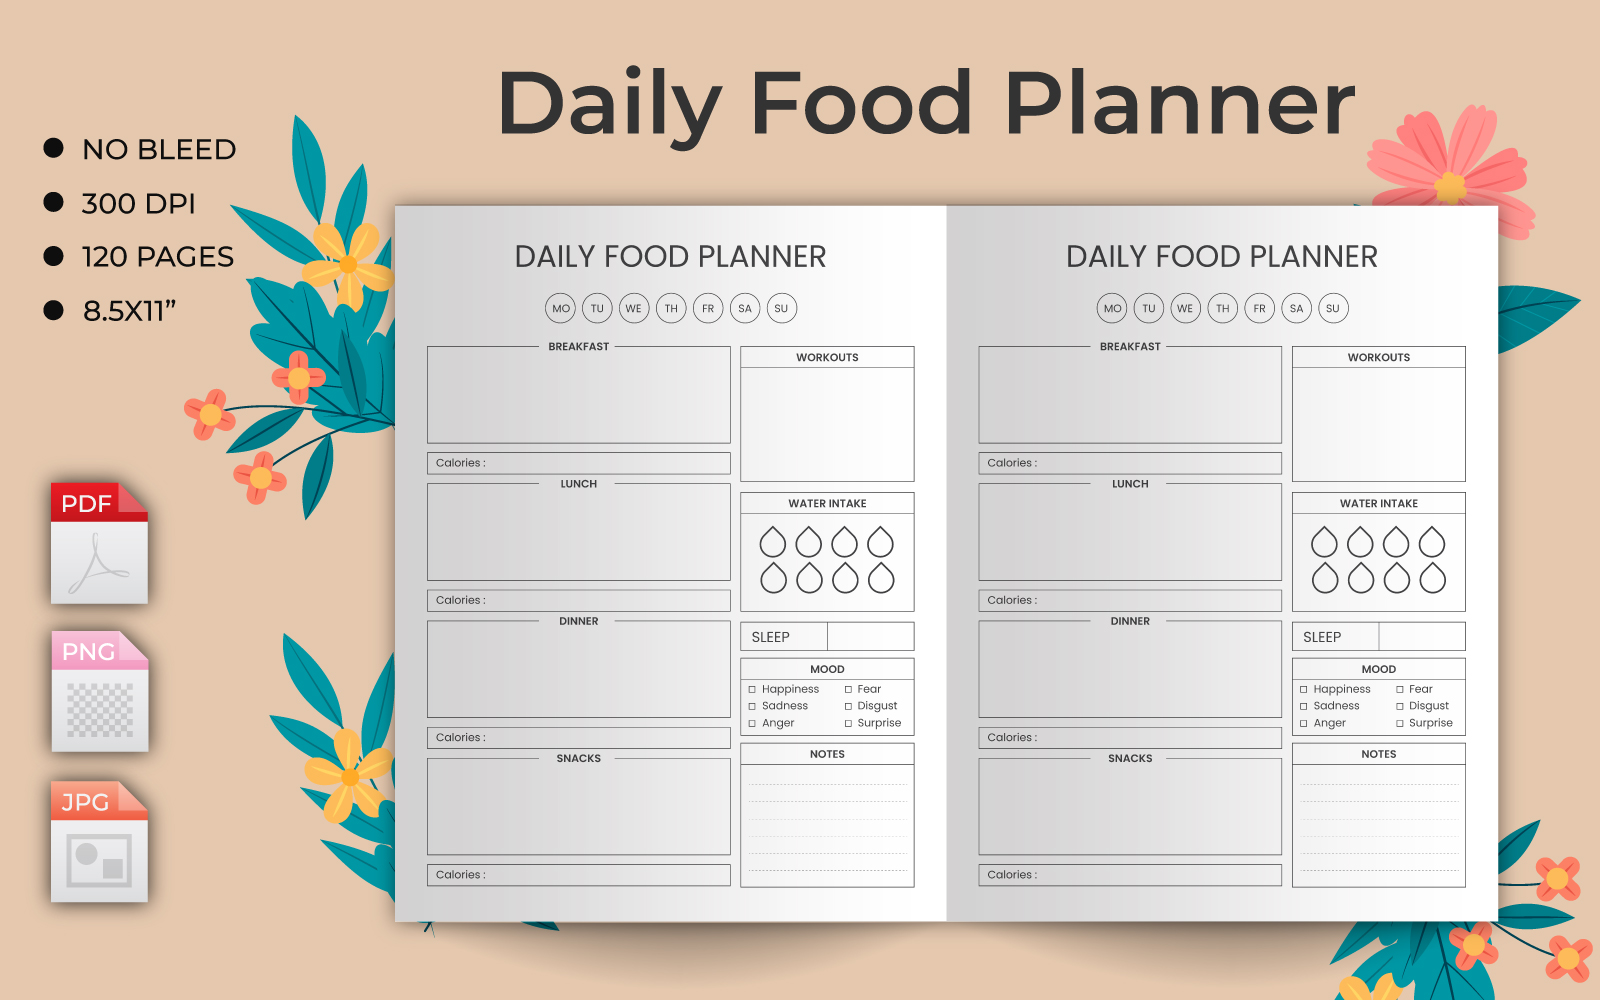 Daily food planner – KDP Interior